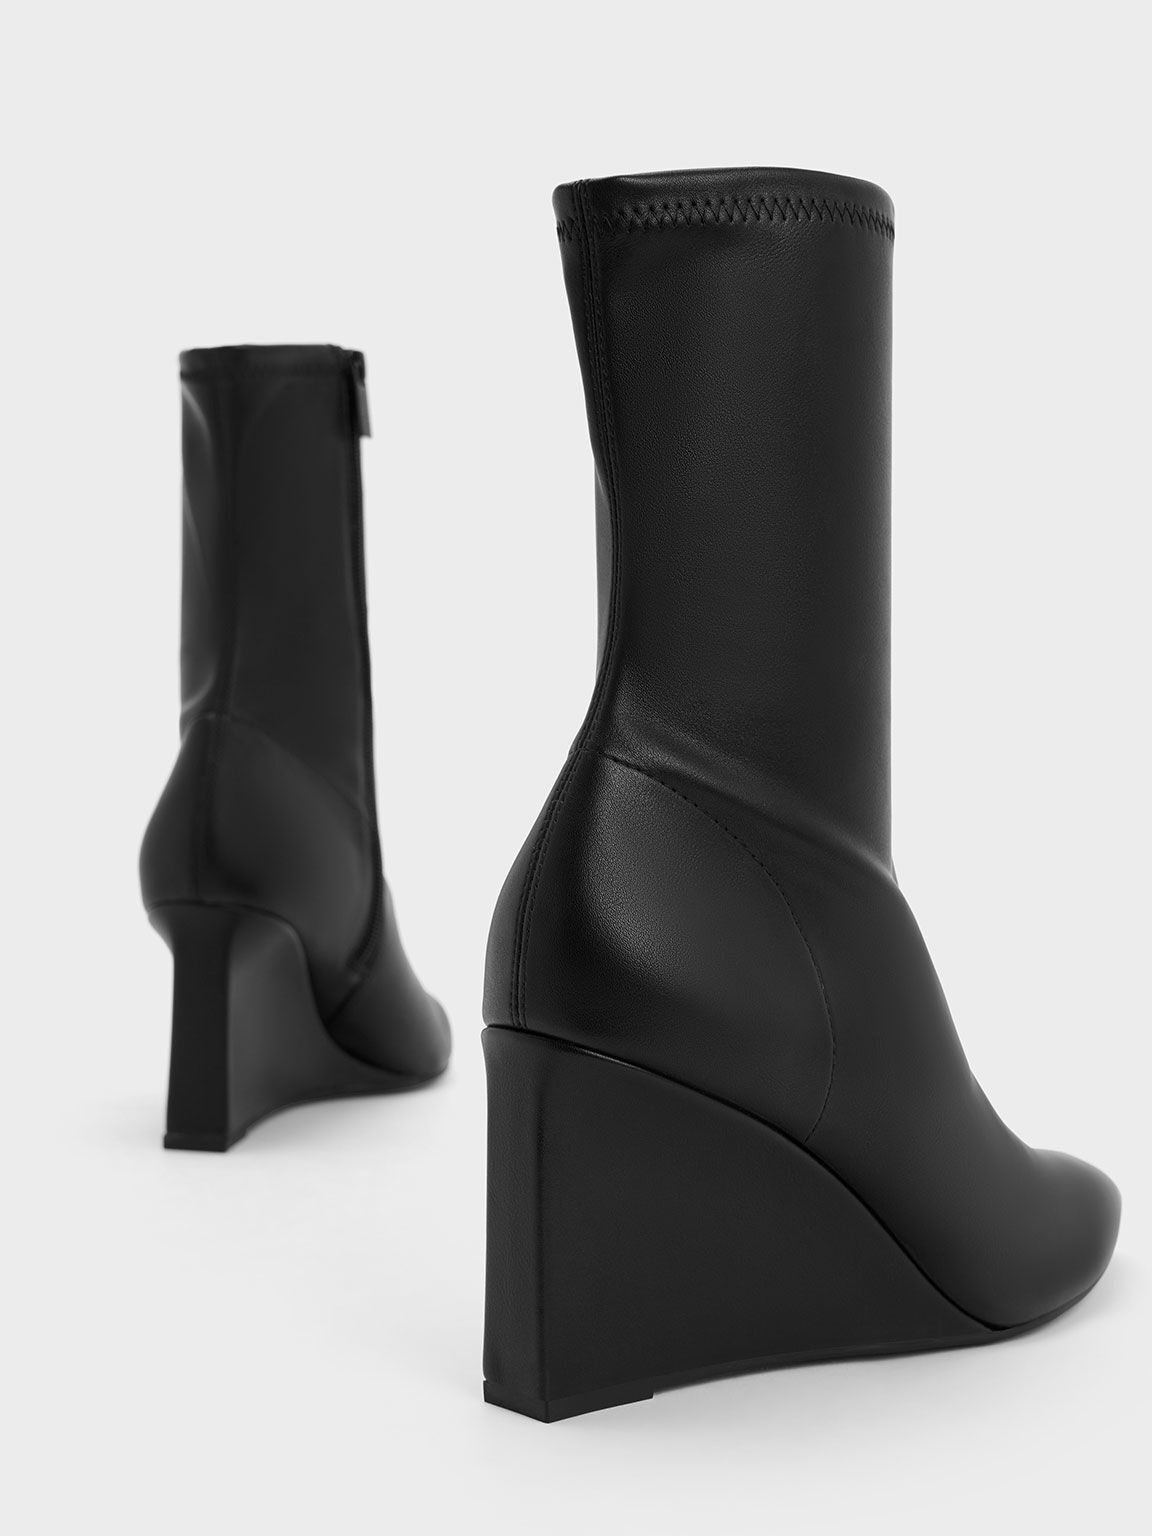 Black Pointed-Toe Wedge Ankle Boots - CHARLES & KEITH LK